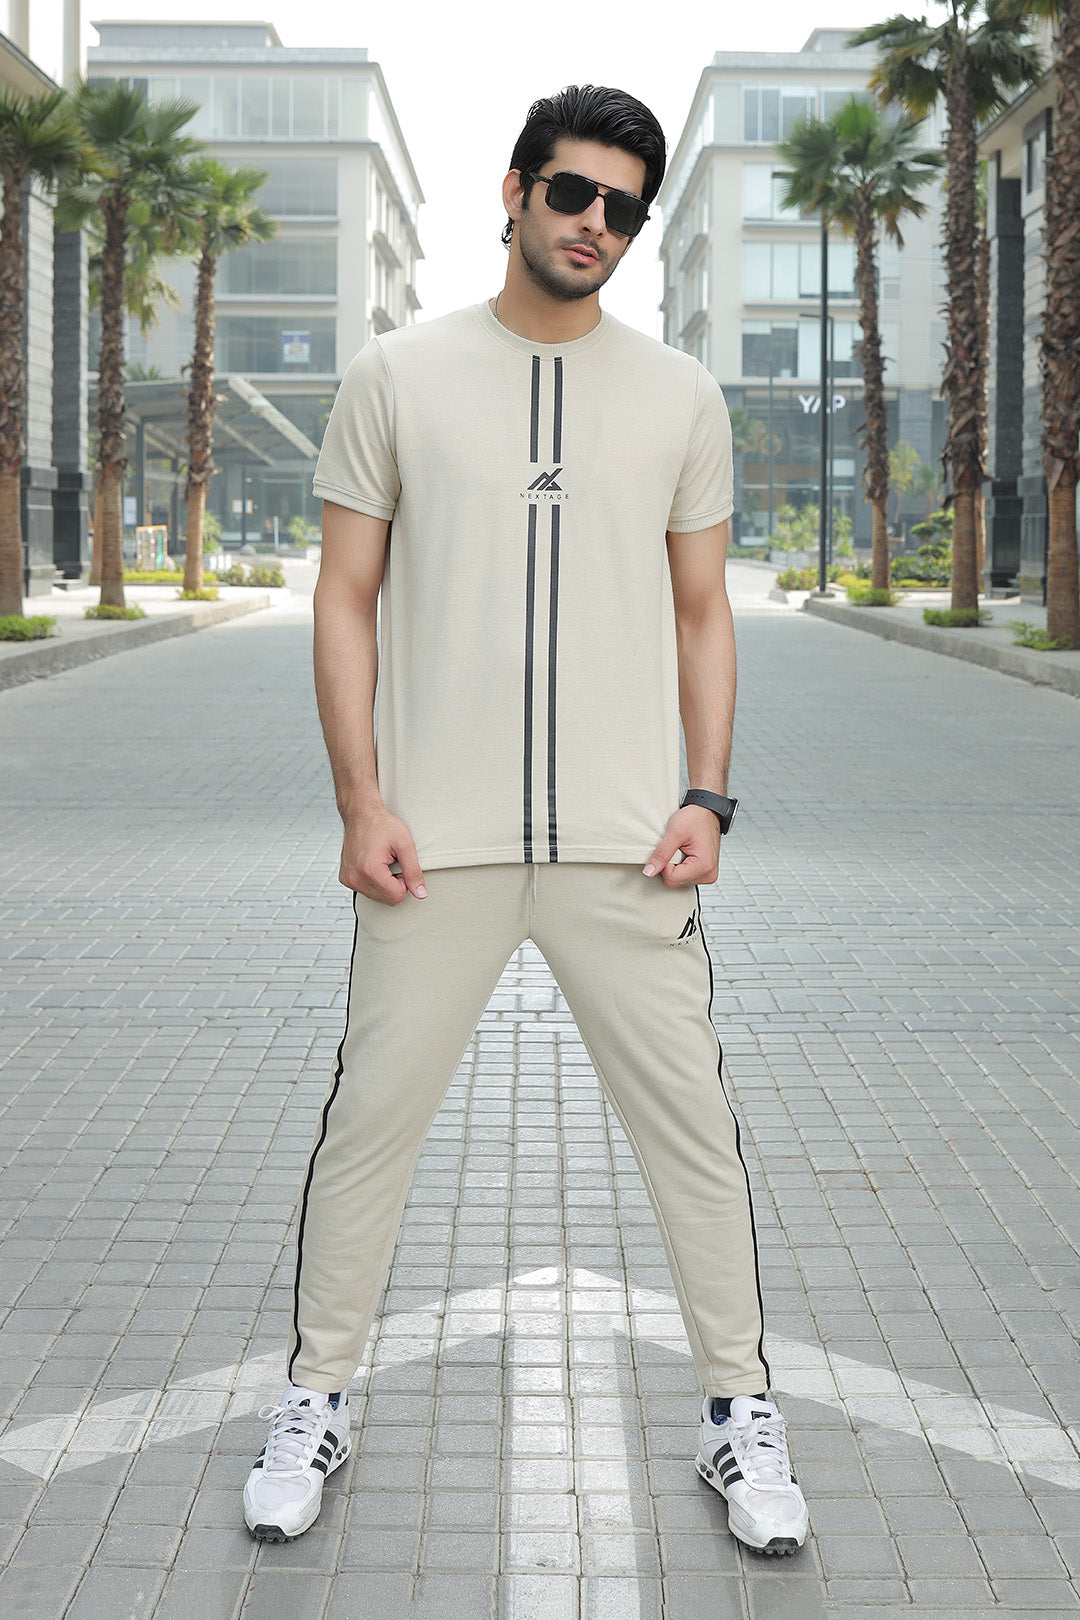 Tracksuits provider  Tracksuits for men & women in Pakistan